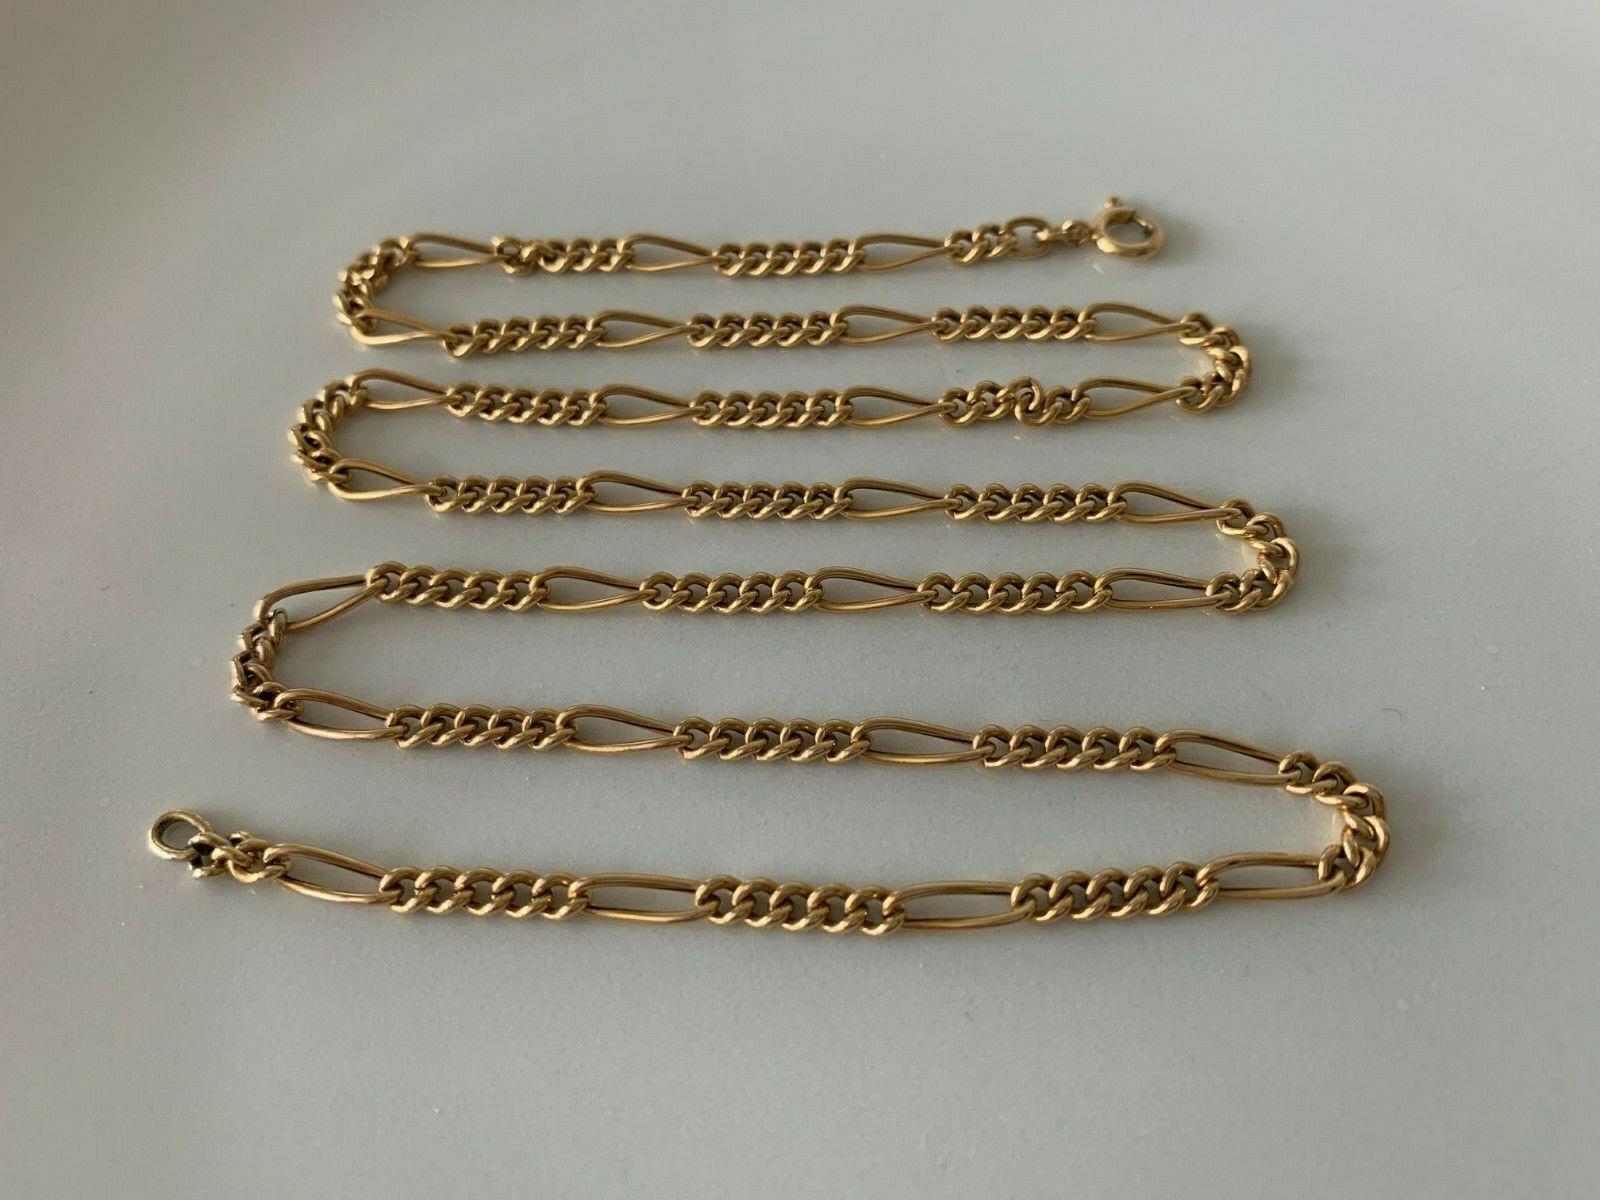 9ct 375 Gold Beautiful Vintage Figaro Chain
Deep buttery gold - Like new
By Italian Goldsmiths UnoAerre
Length - 24.75 Inches 
Fully Hallmarked both Italian & British
Hallmarked by GG Ltd  Date Letter 1969